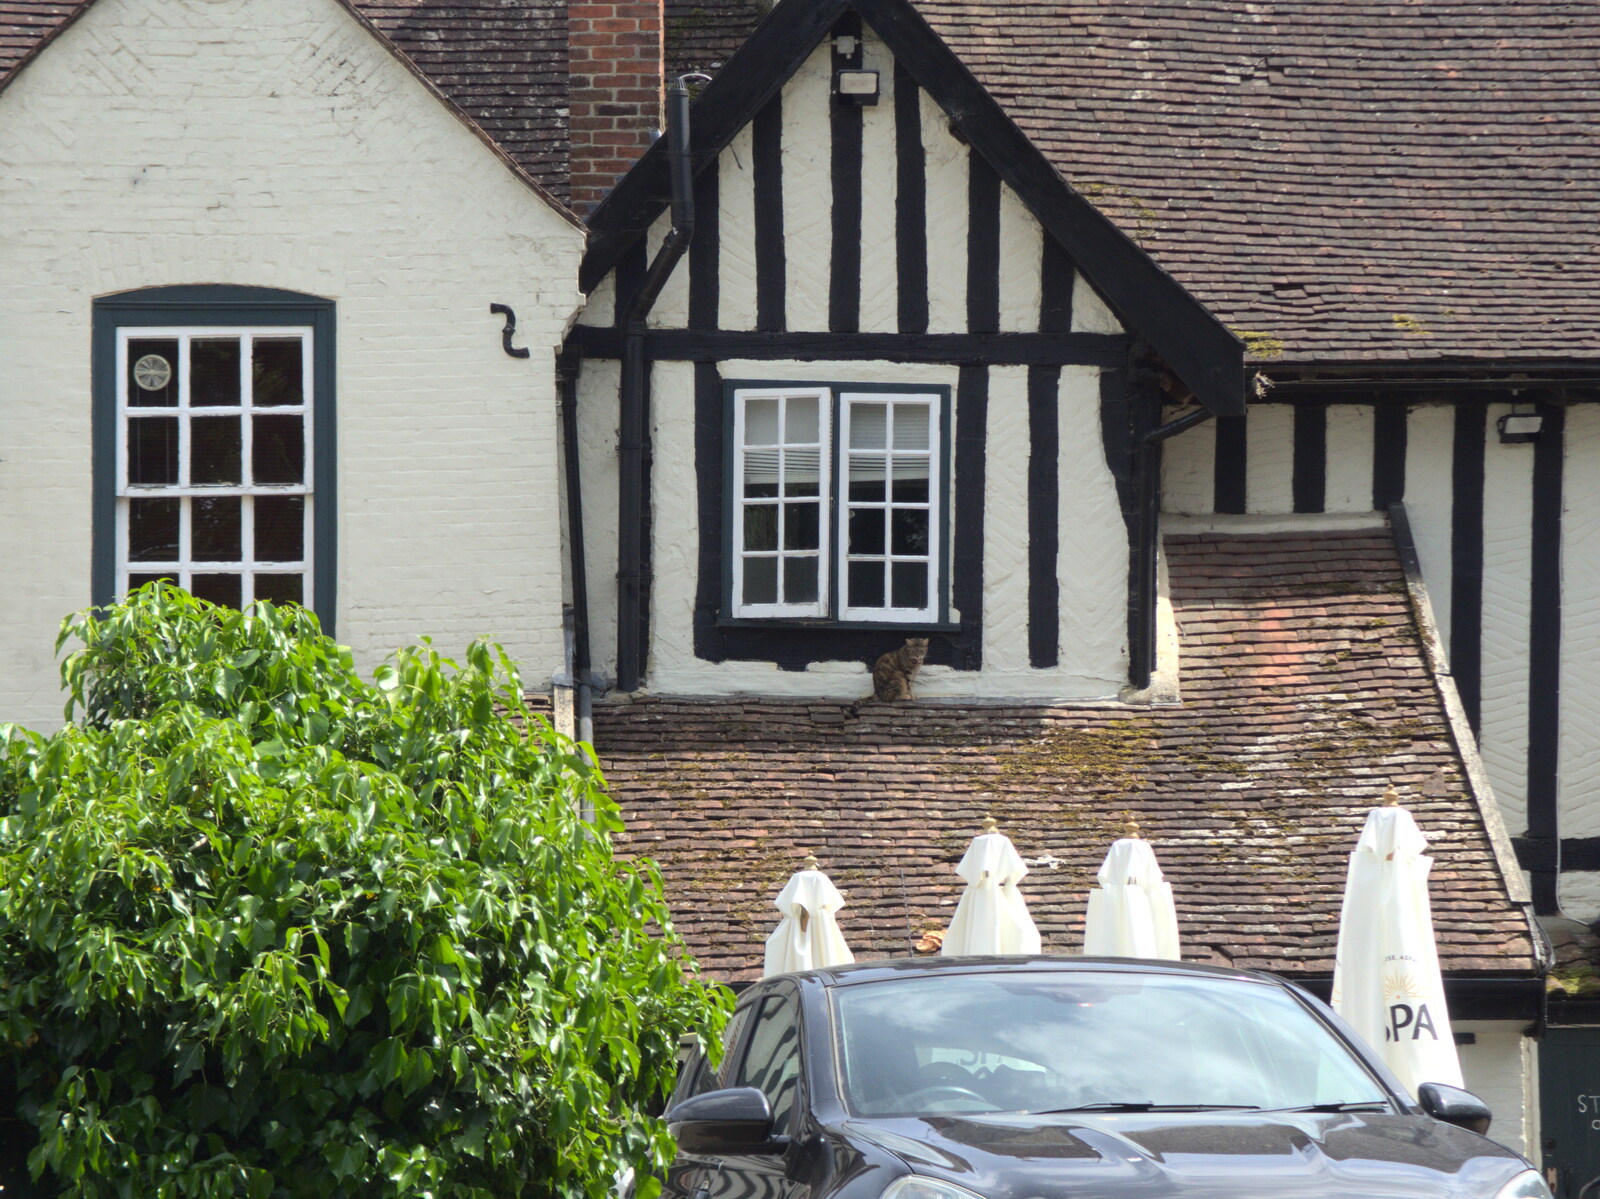 There's a cat on the roof at the Hoxne Swan from A Quest for the Fabled Swimming Spot, Hoxne, Suffolk - 29th May 2023